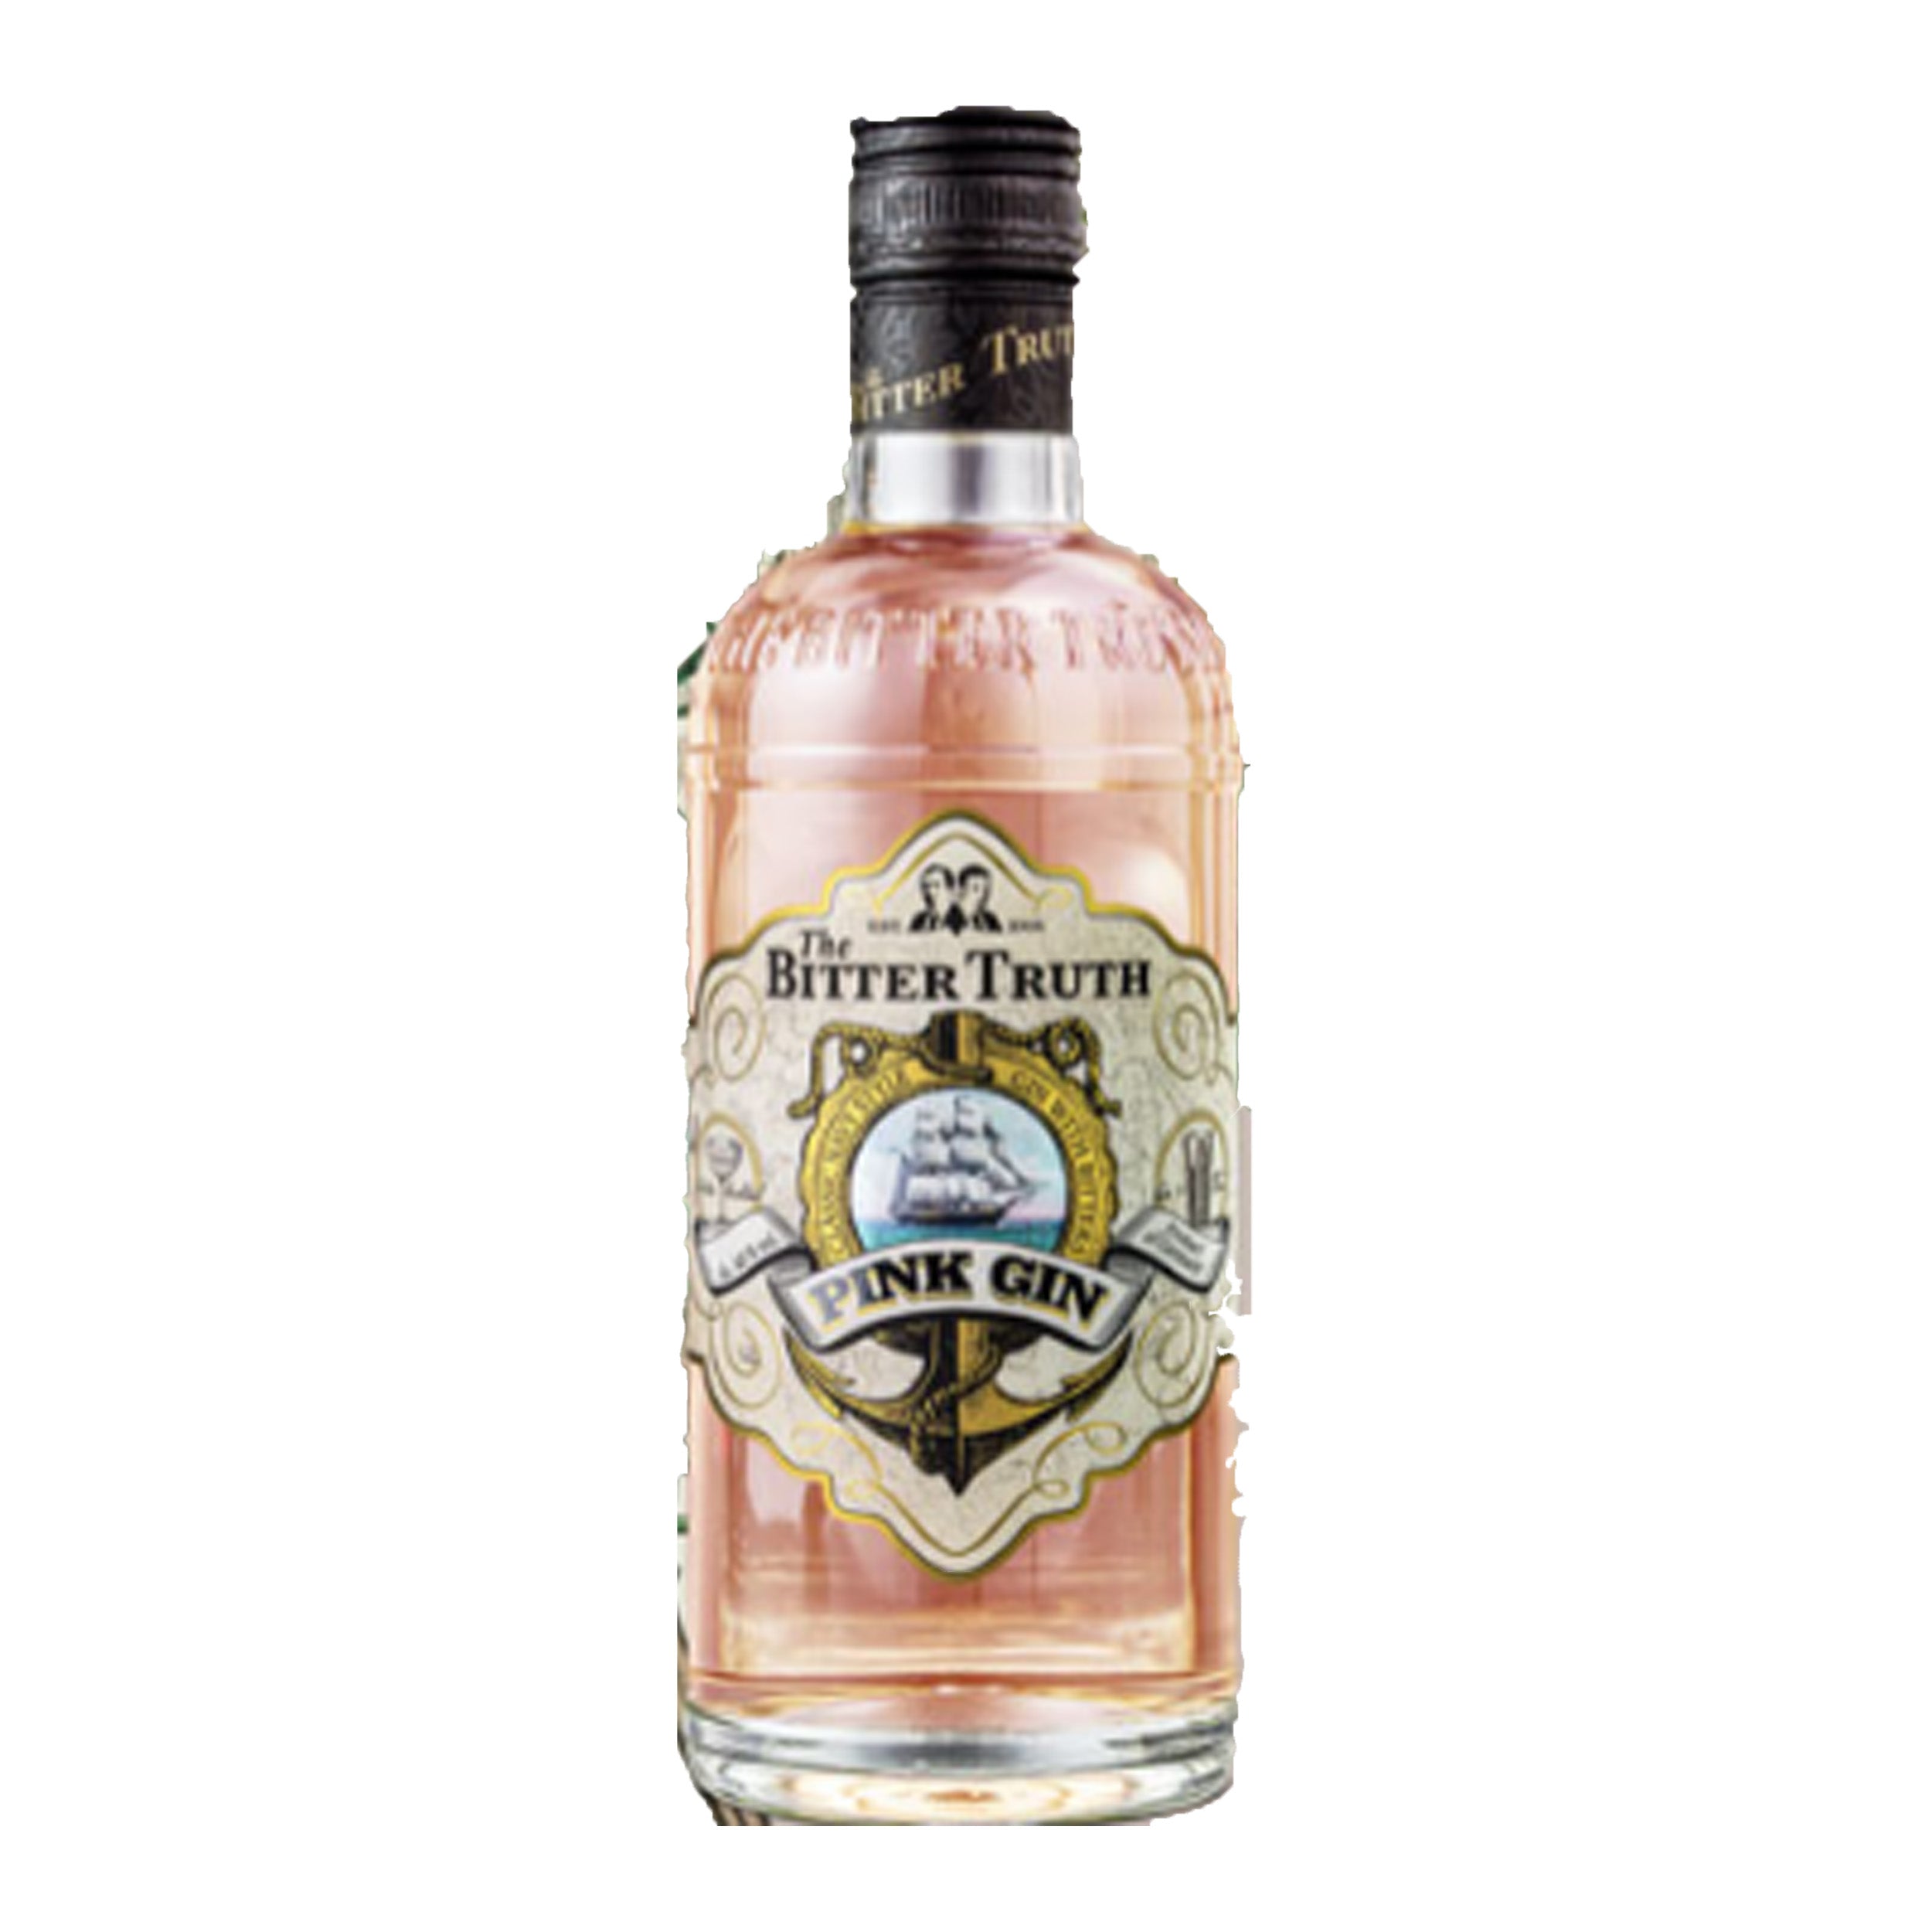 – Navy Pink Truth Bitter Spiced Liquor Chips Gin The